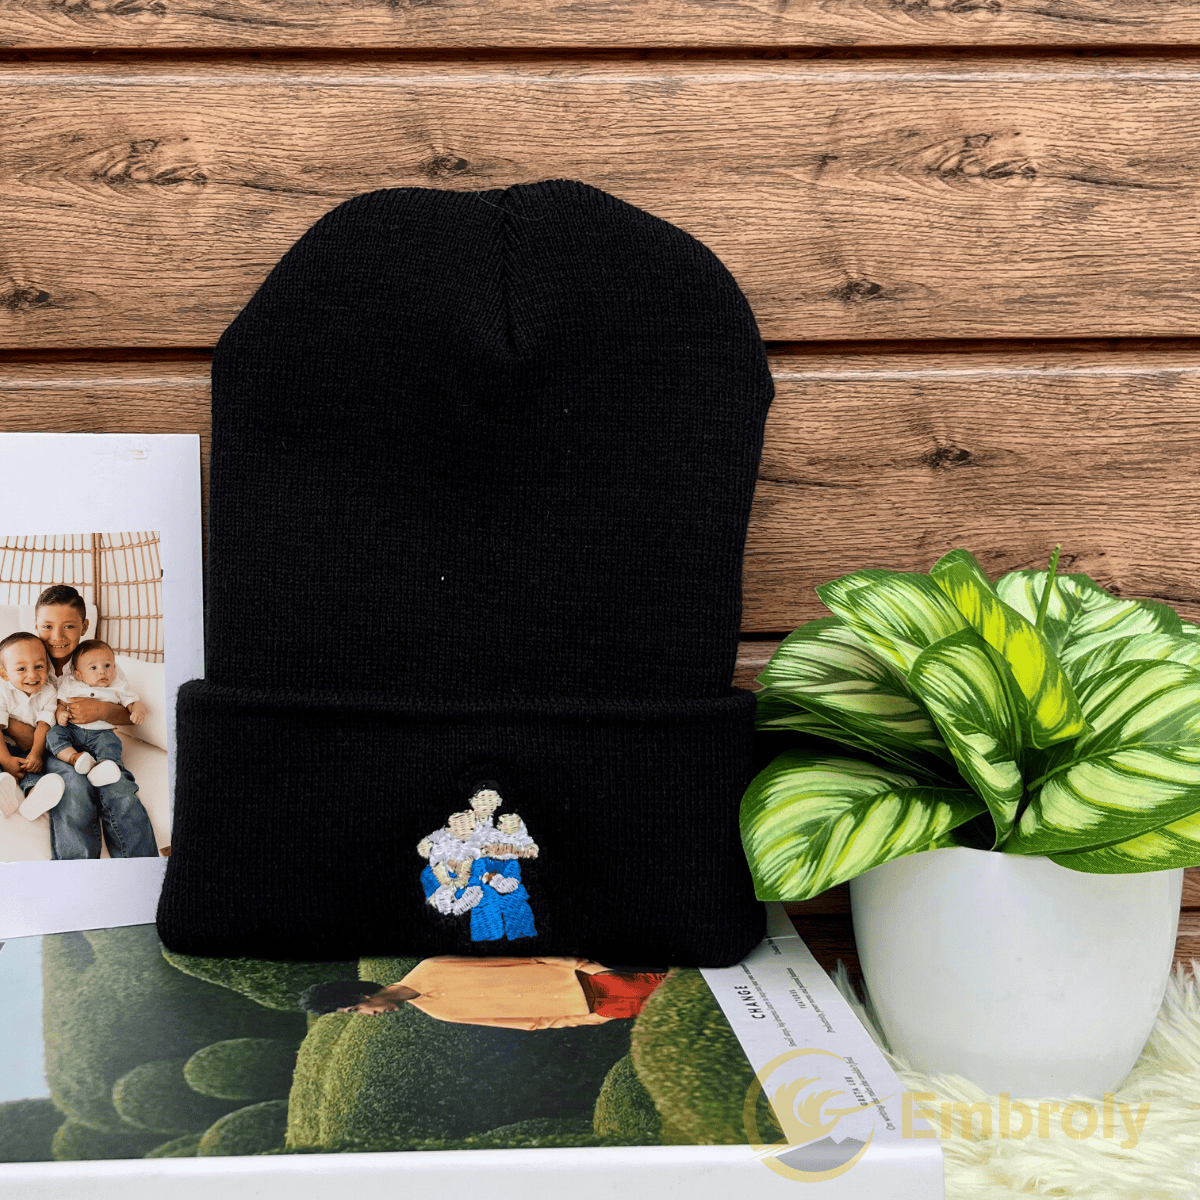 Rasende at fortsætte Tranquility Portrait Embroidery Design Beanie Hat, Best Anniversary Gifts For Him, Personalized  Hat With Date Or Name Under Photo - Embroly